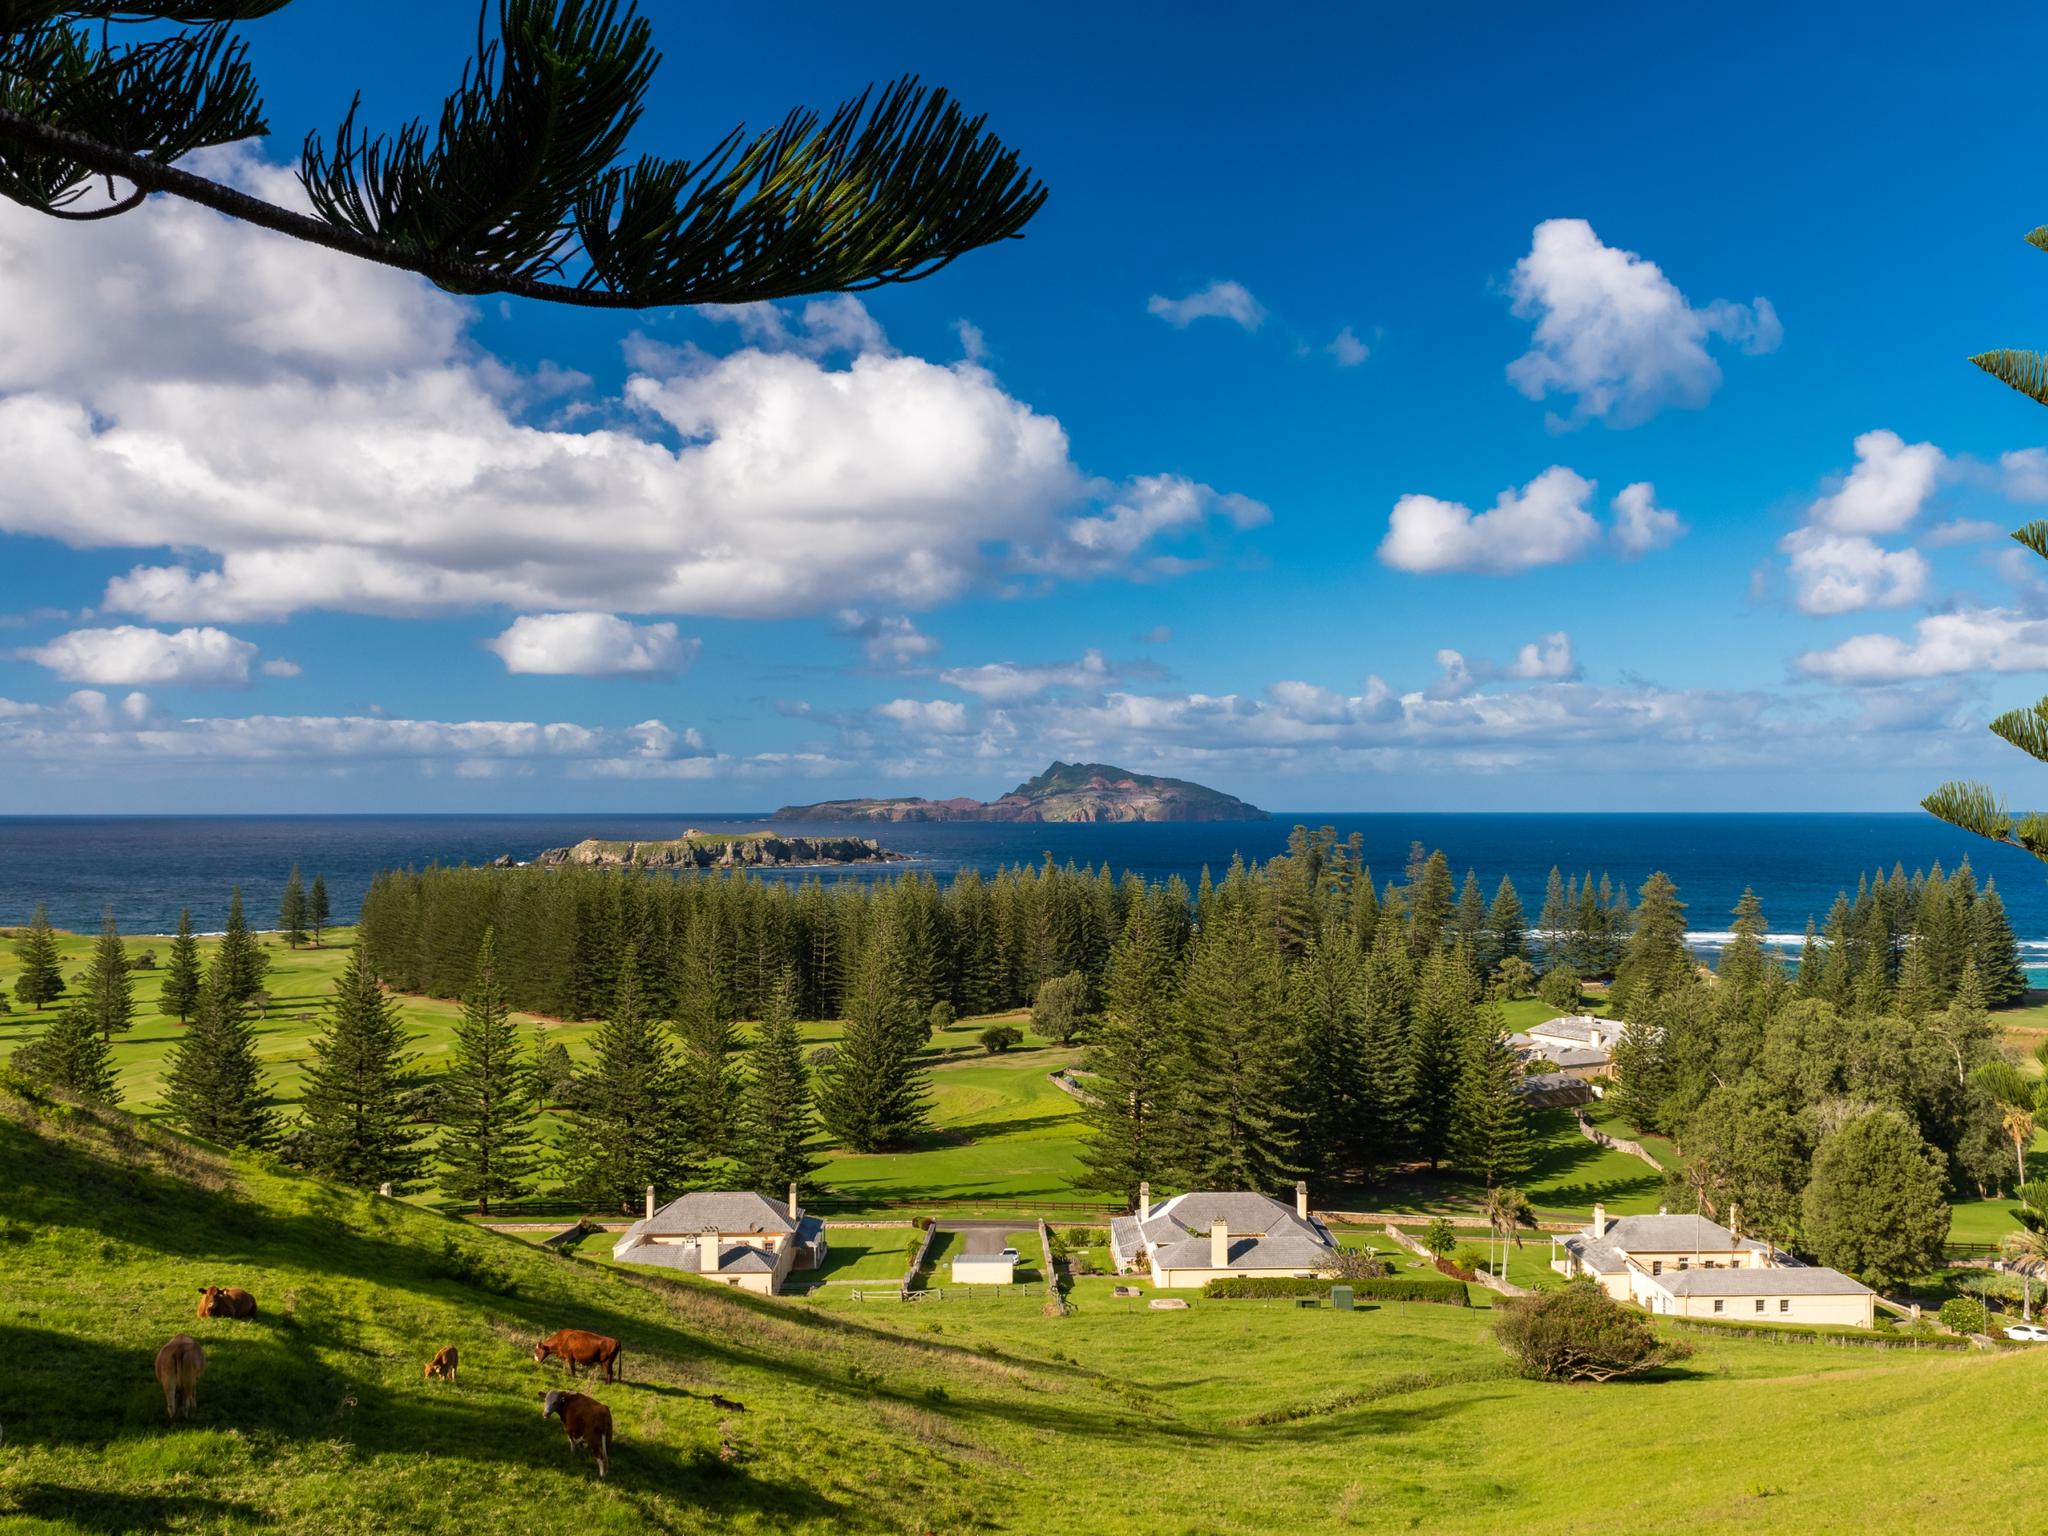 Norfolk Island: The Australian island that feels like another country